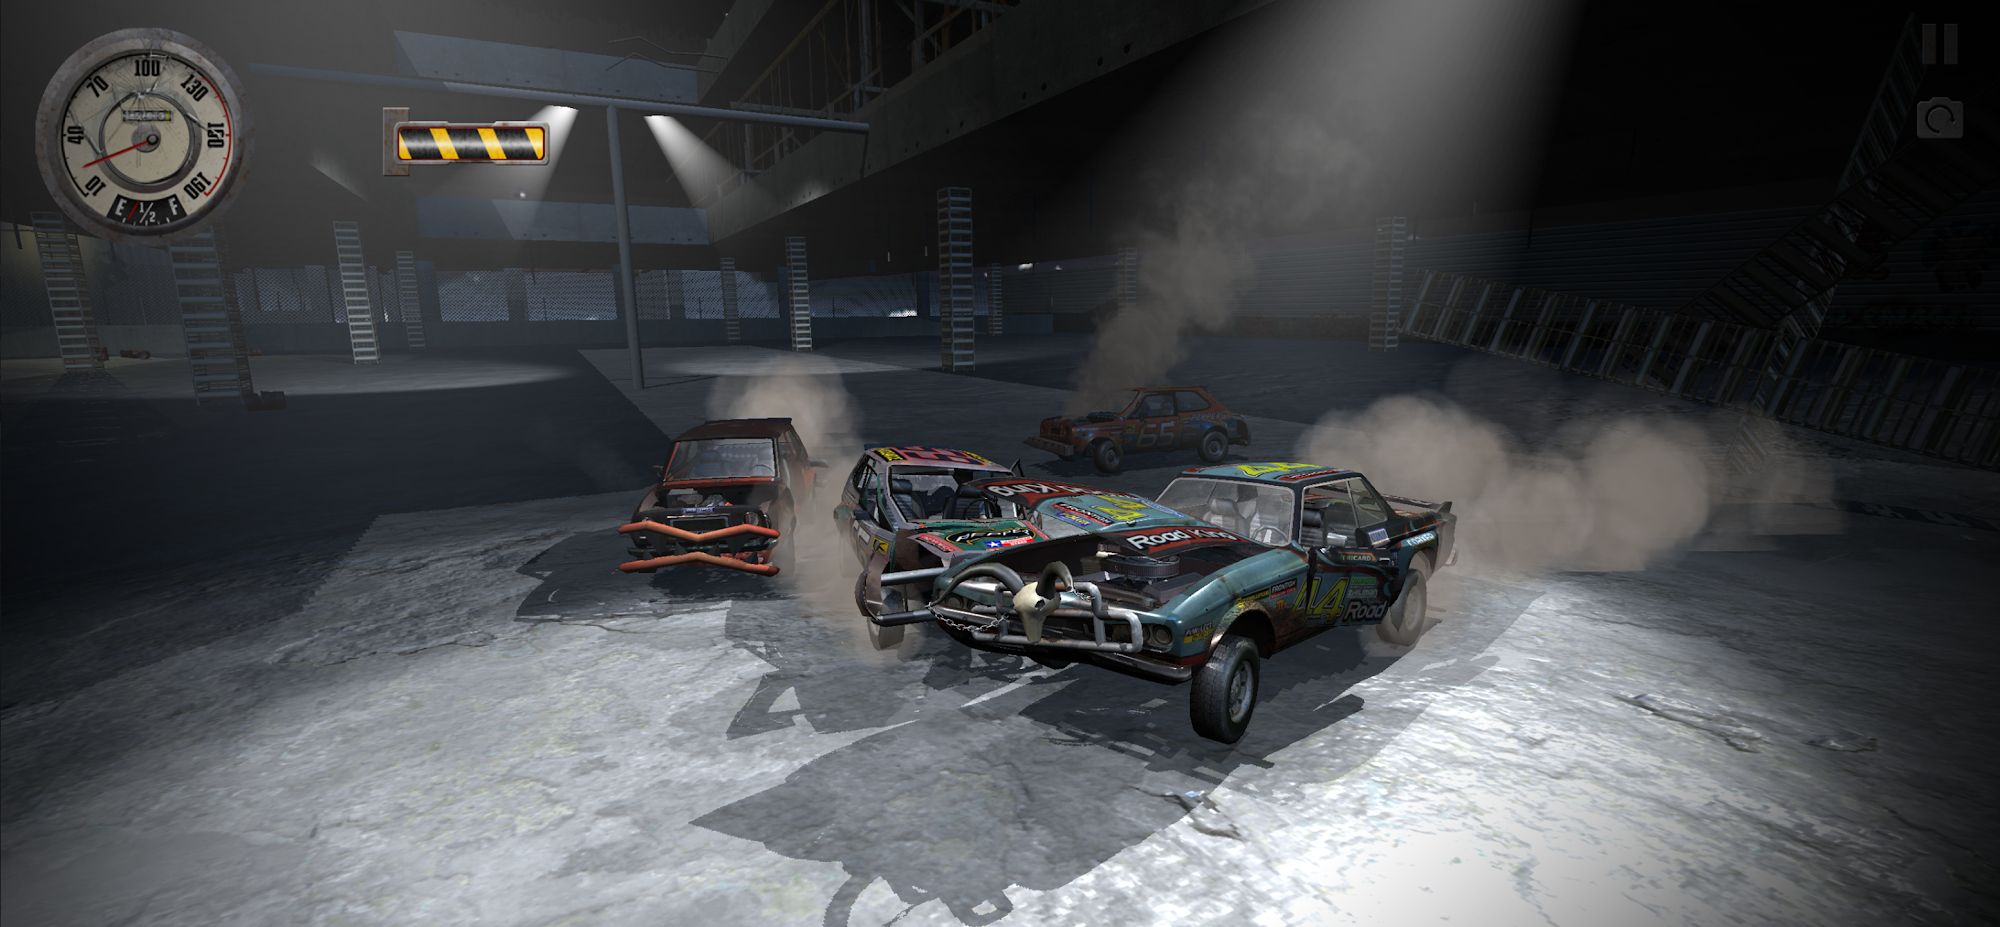 Derby Forever Online Wreck Cars Festival 2021 for Android